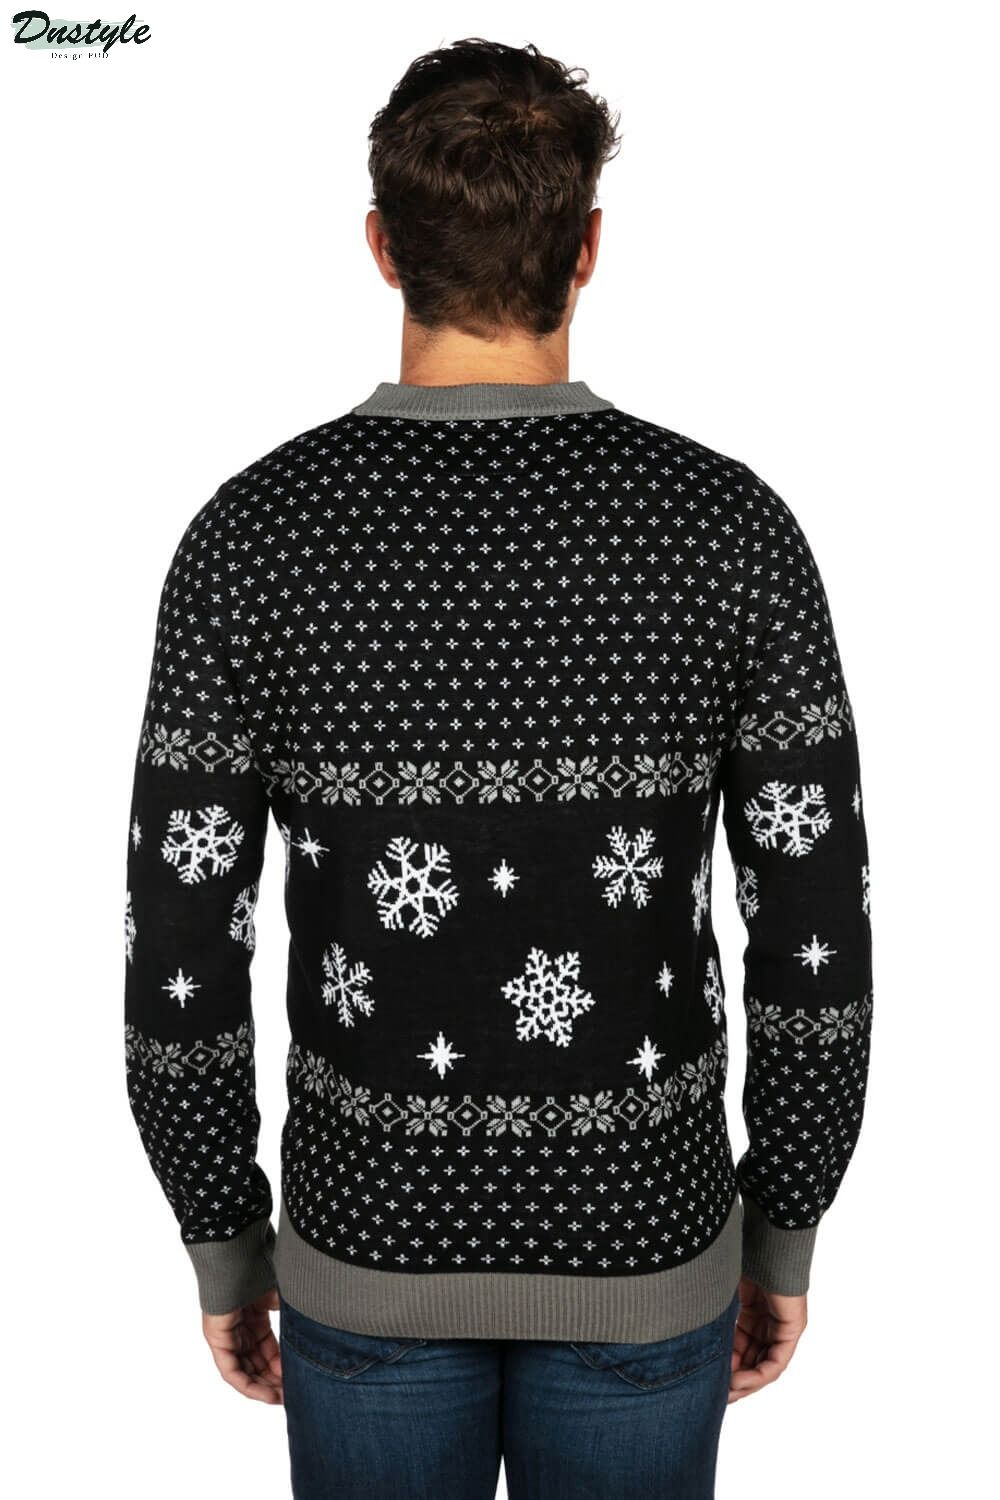 Let it Snow Light Up Ugly Christmas Sweater 1